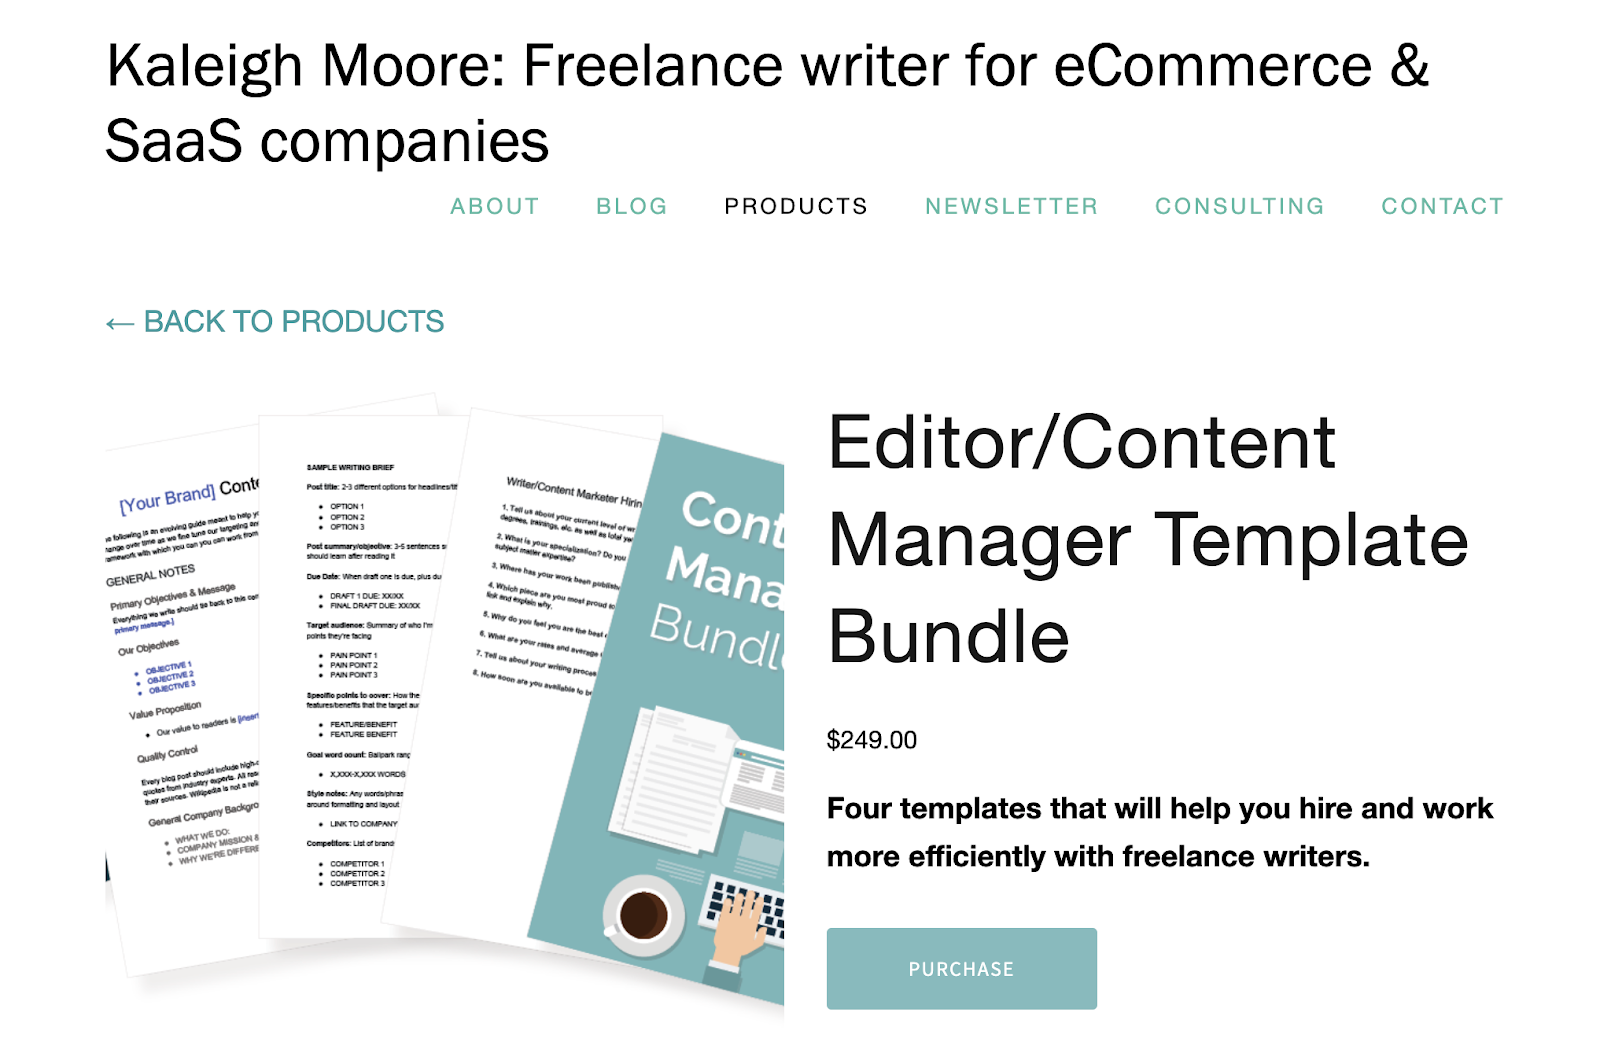 Content Brief Templates: 20 Free Downloads & Examples